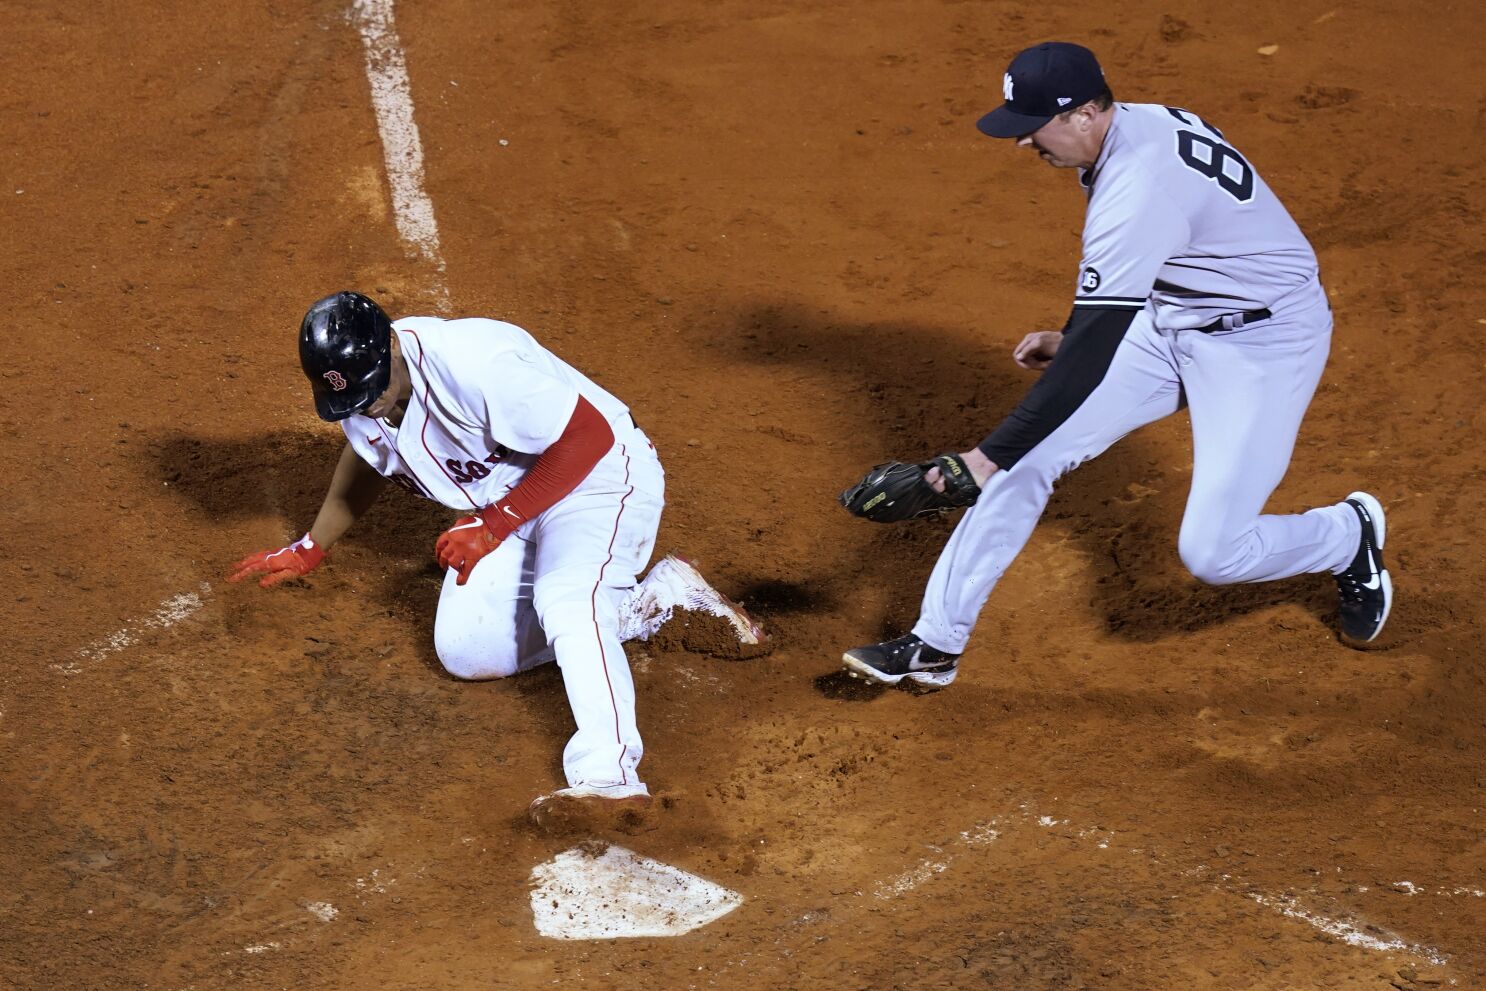 Verdugo, Red Sox beat Marlins in rain-shortened game